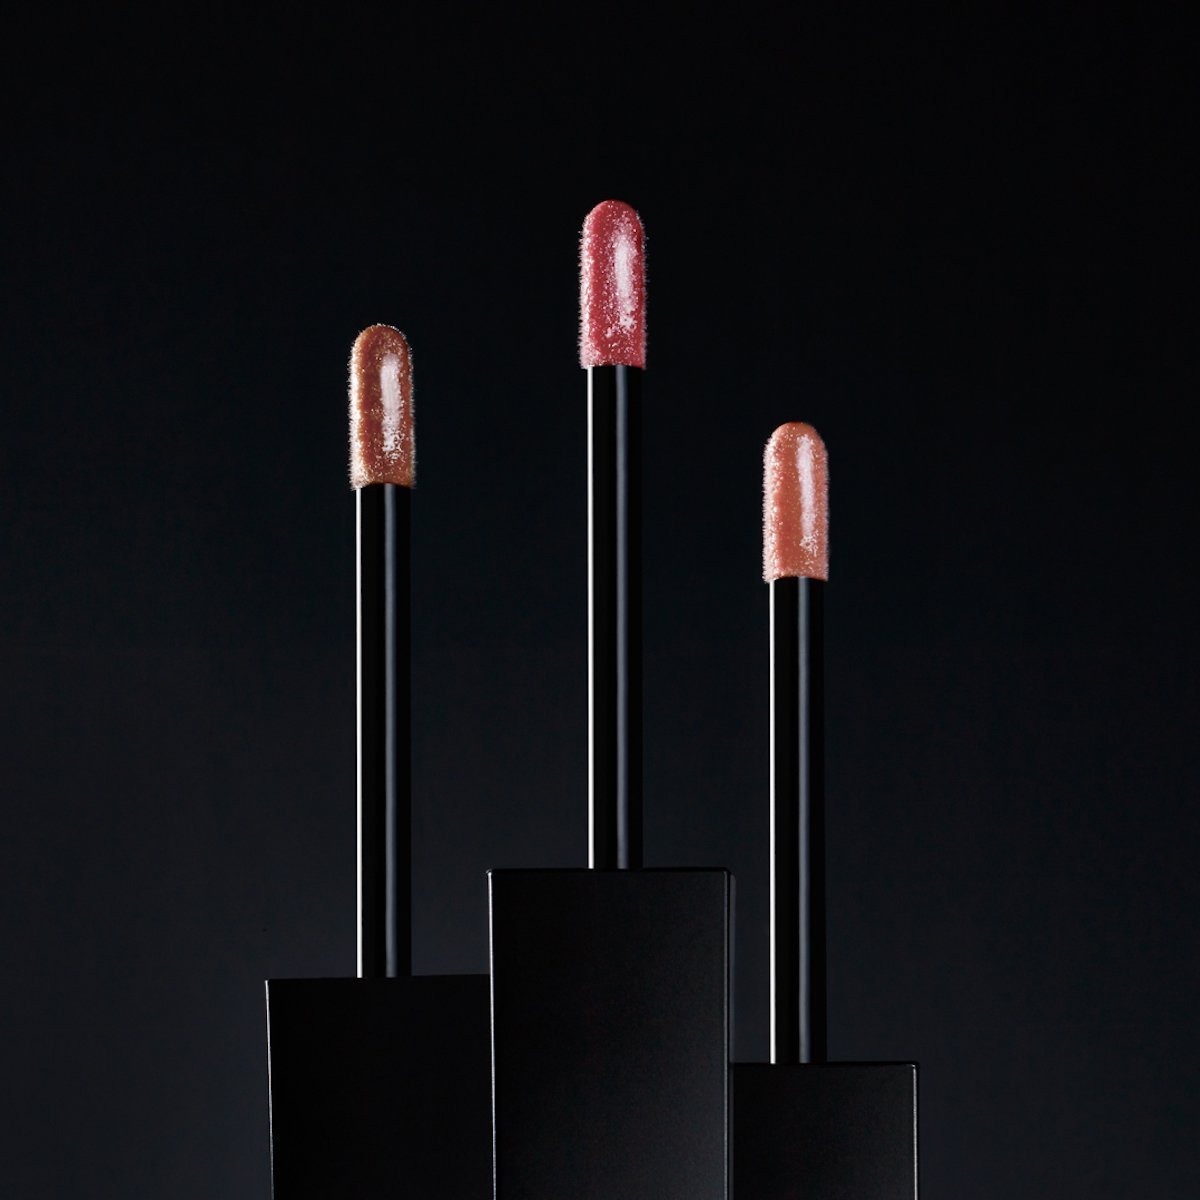 SOIGNE - WARM PINK WITH GOLD SHIMMER - non-sticky, high-shine formula in various pink and bronze shades